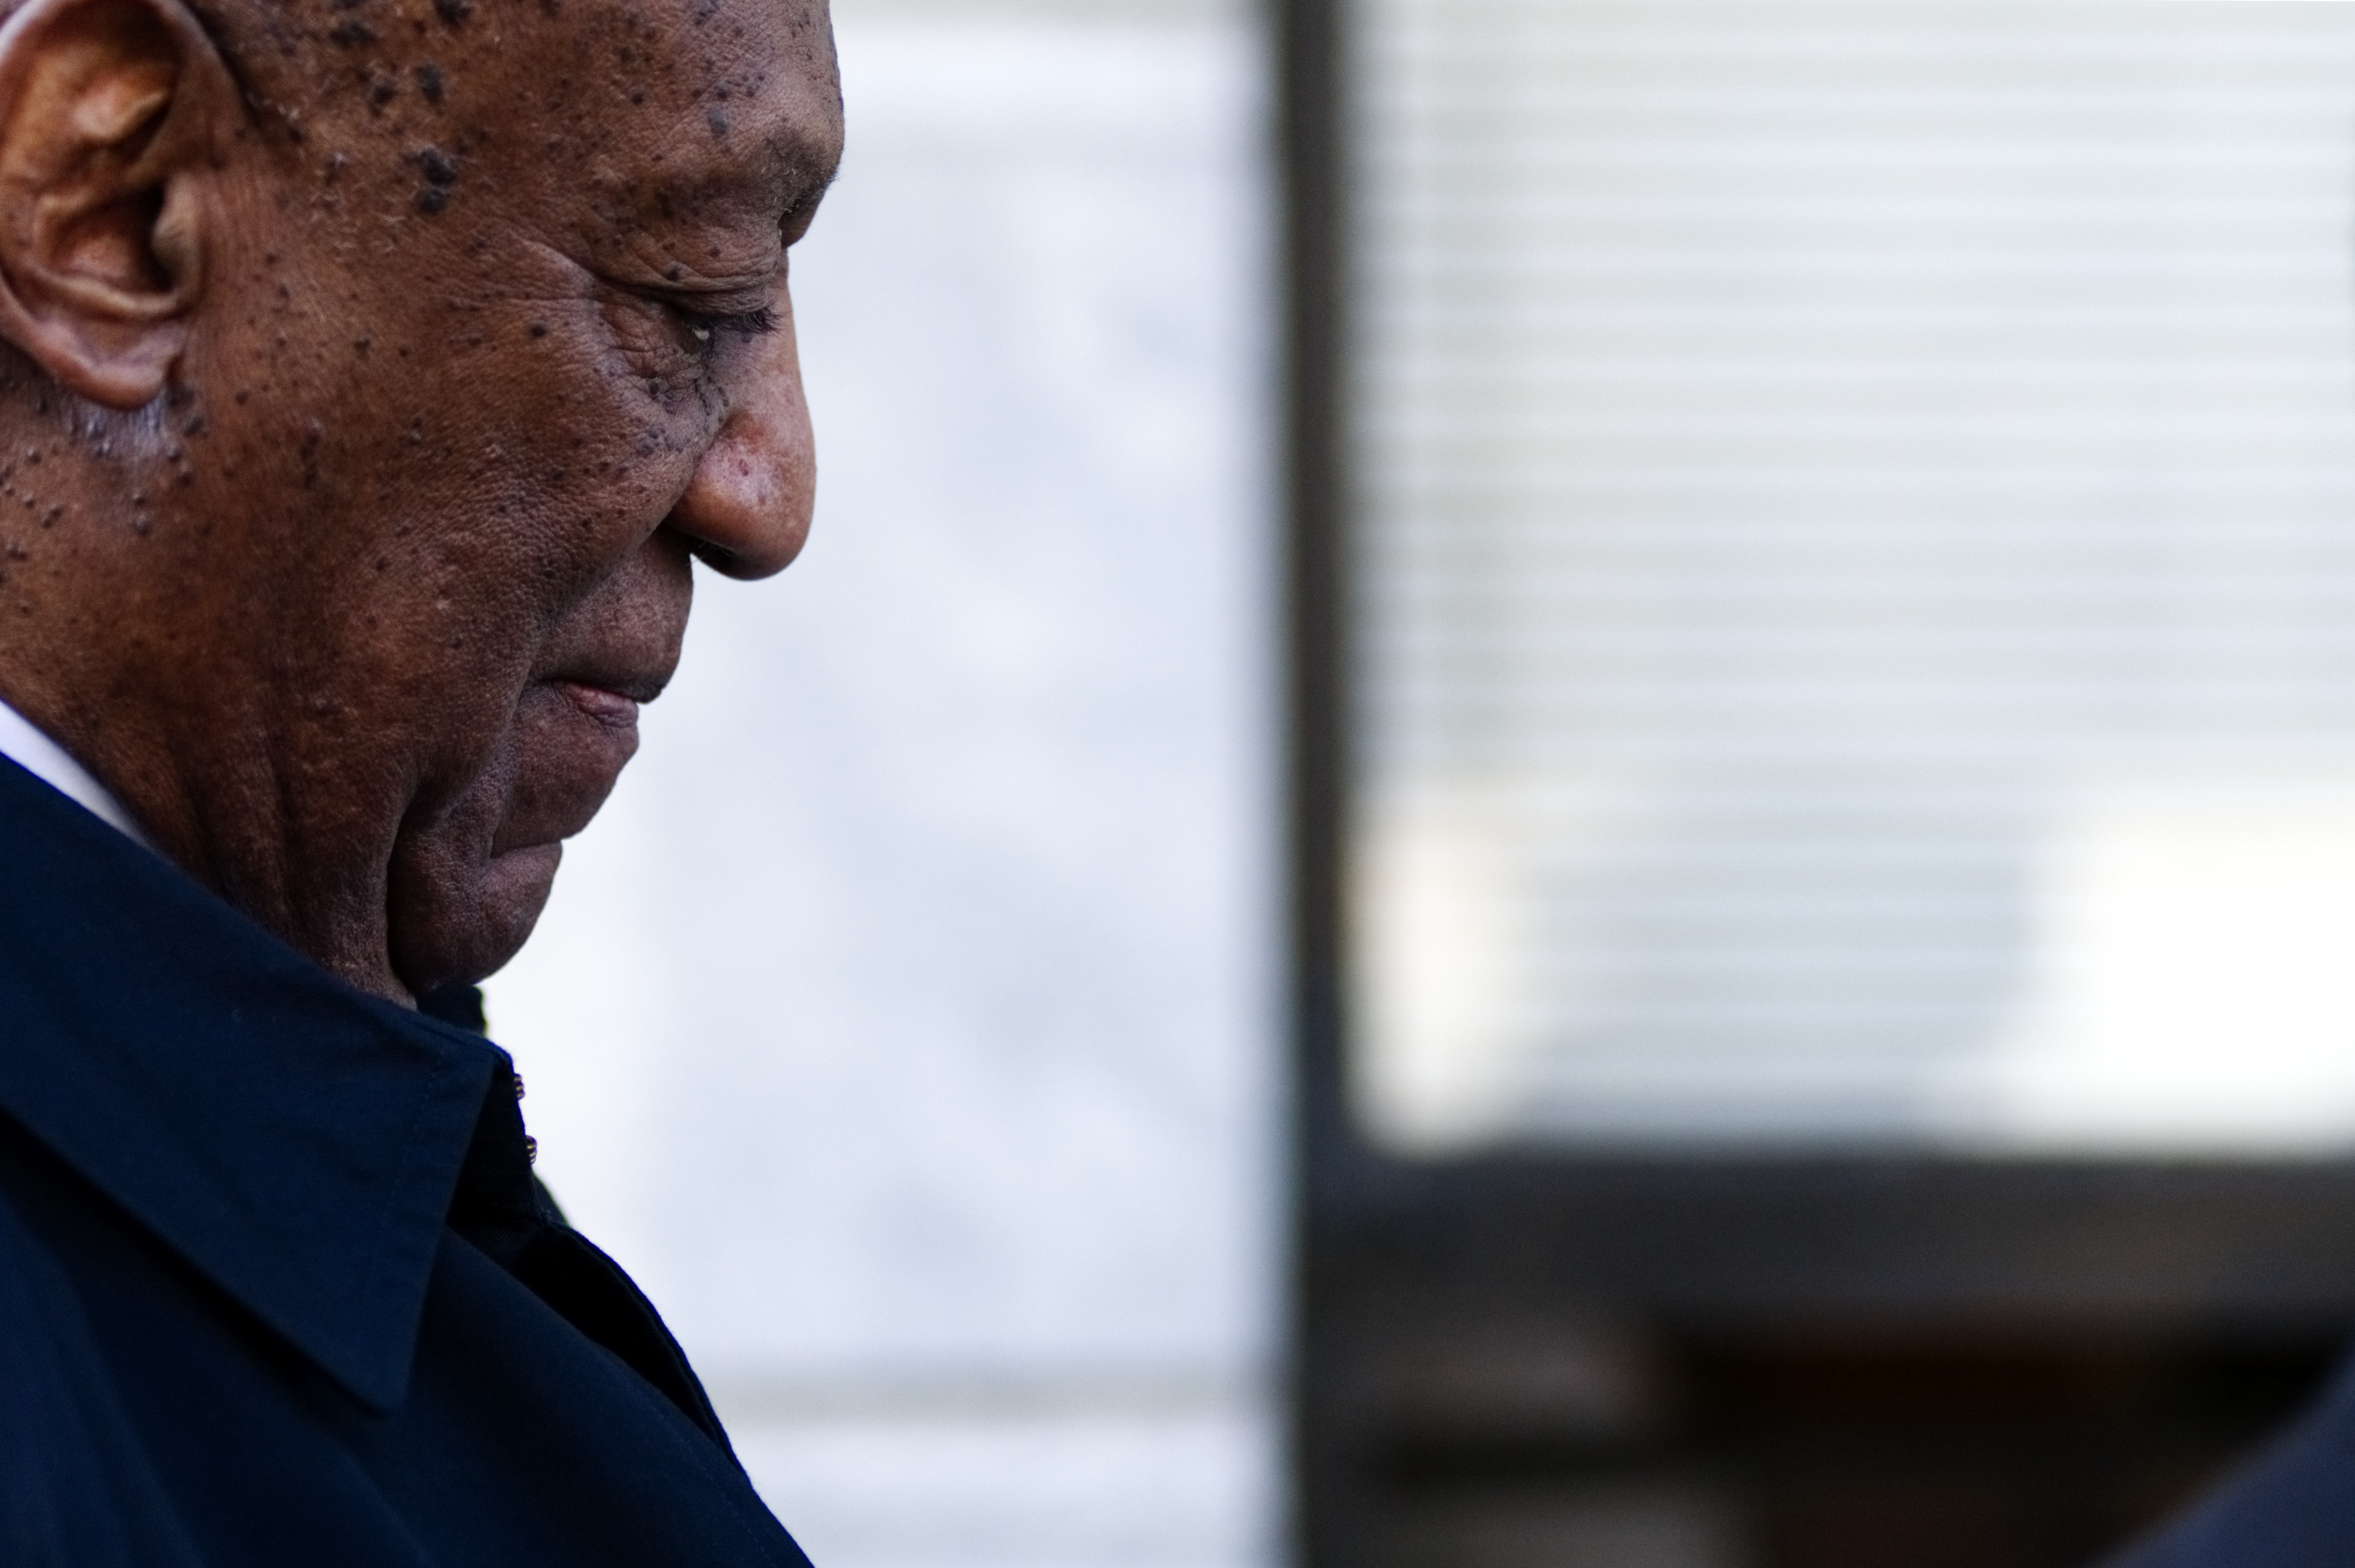 Cosby Sexual Assault Trial in Norristown, PA